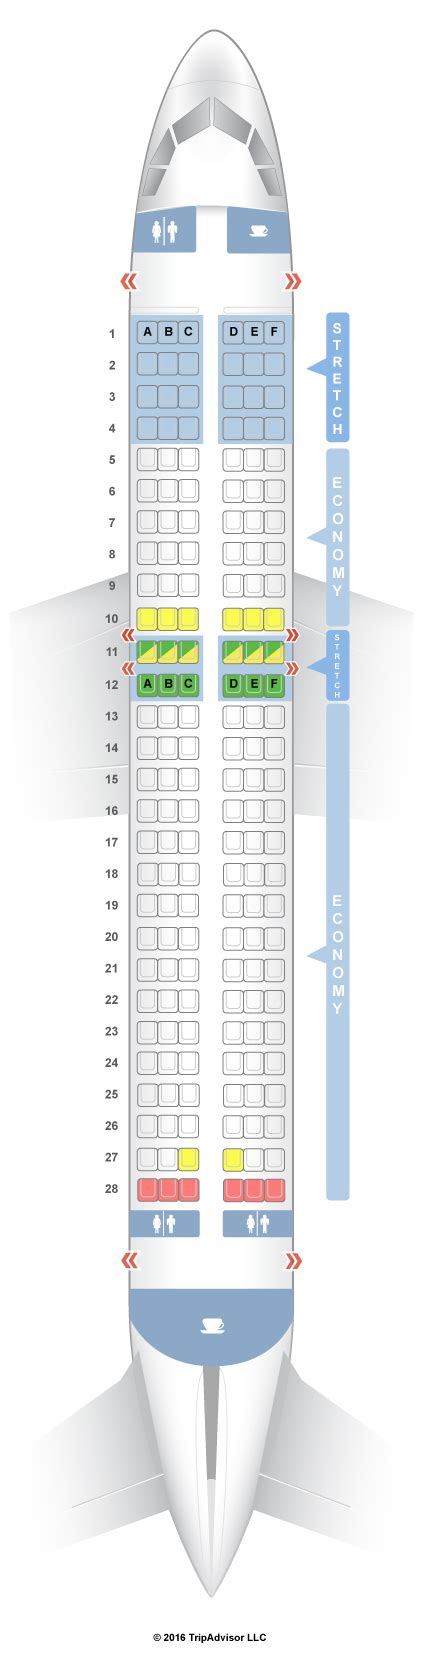 Frontier airlines a320 airbus aircraft seating chart configuration f9 seat map aircrafts a319 a321Frontier airlines seating chart airbus a320 A320 airbus lufthansa seat map airlines seating plan asientos seats seatmaestro mapa cabine frontier plano 200 del seatmap air show8 images frontier airlines seating chart and review..